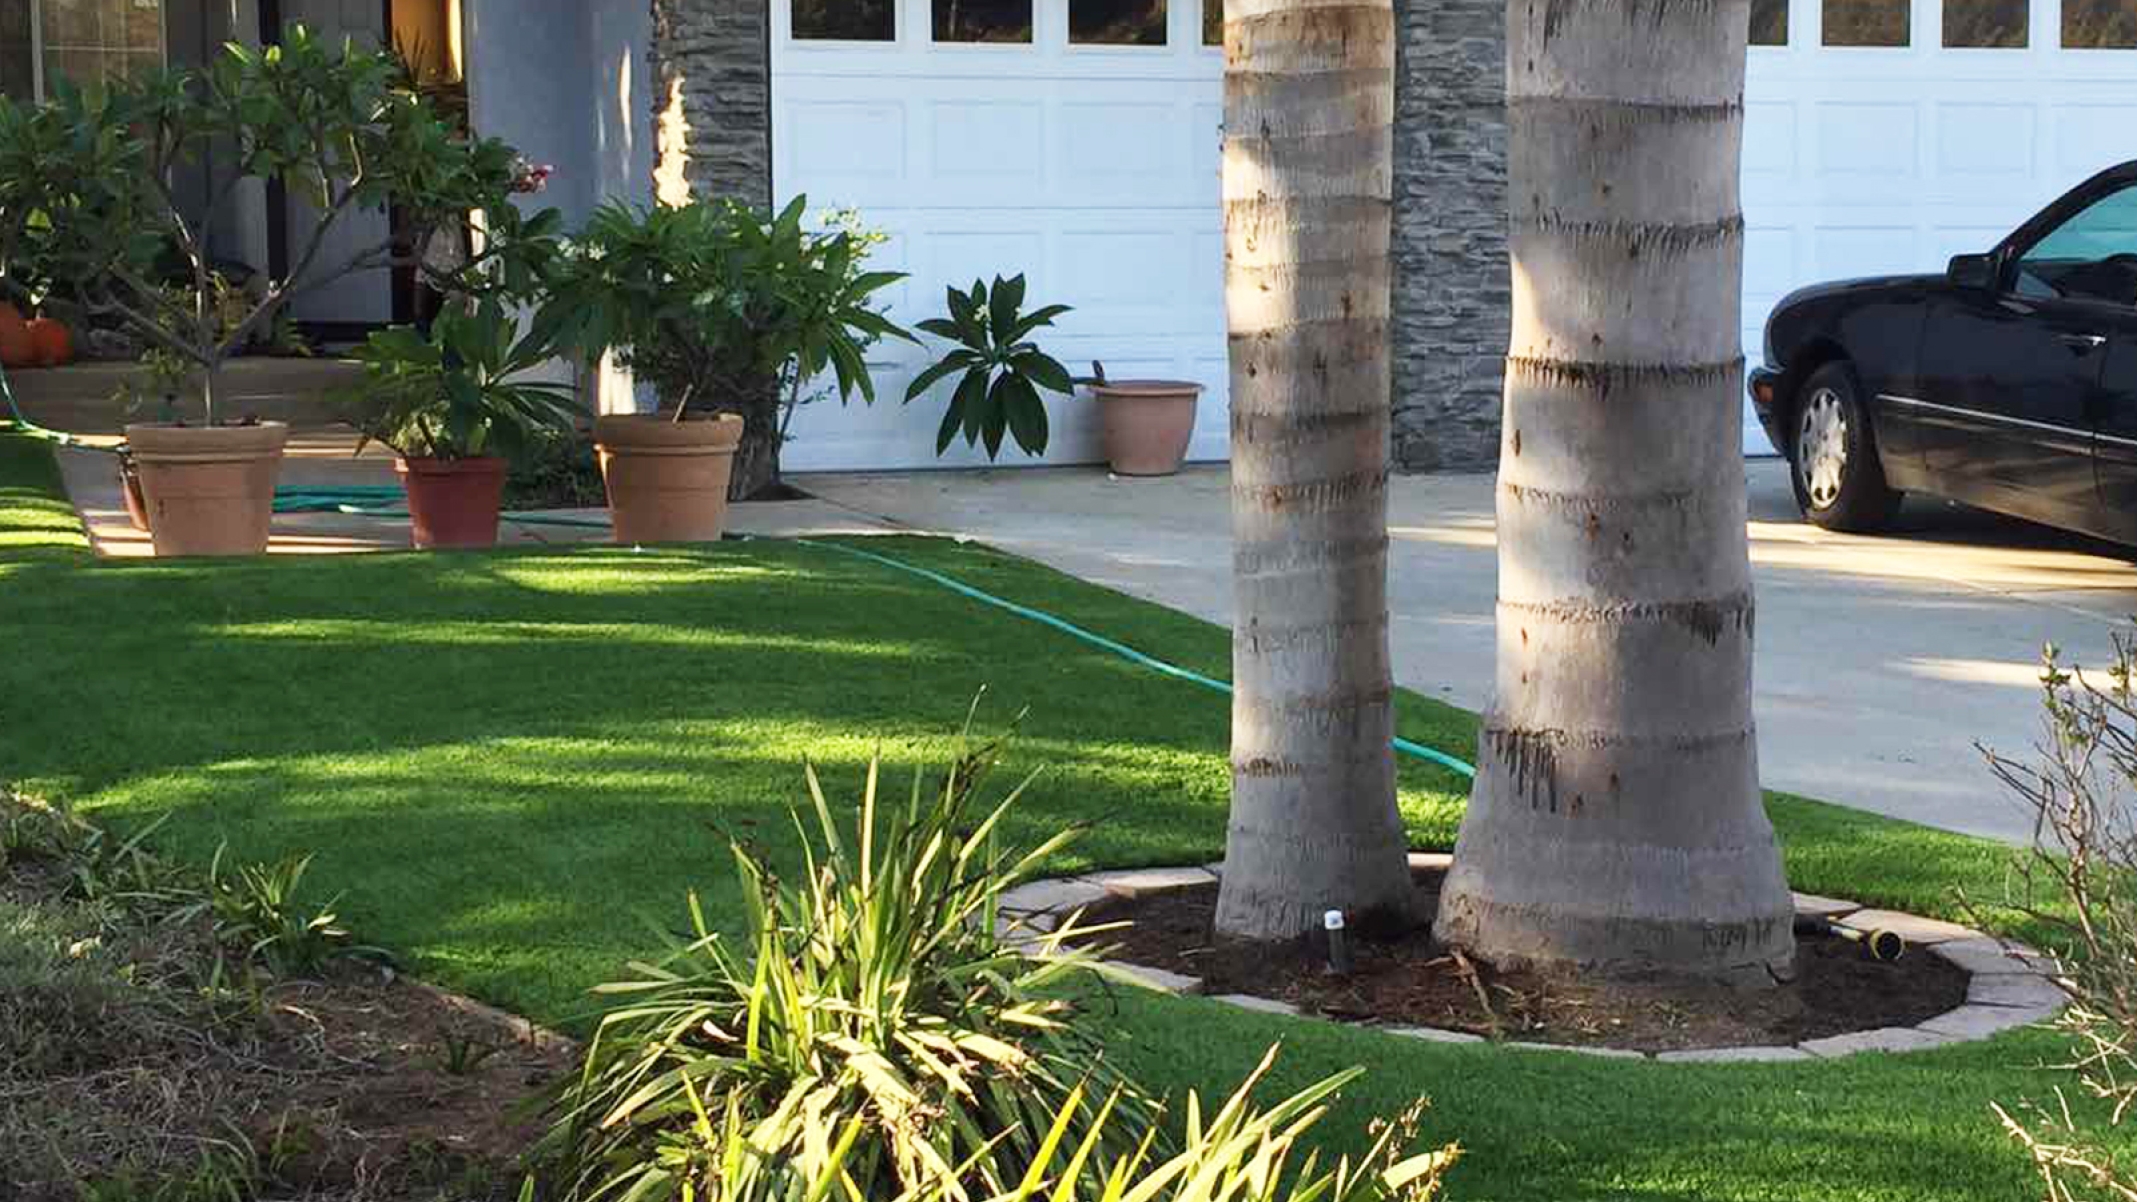 Front yard landscaping ideas landscape lawn artificial grass, synthetic turf, garden flowers palm trees, garage door, driveway